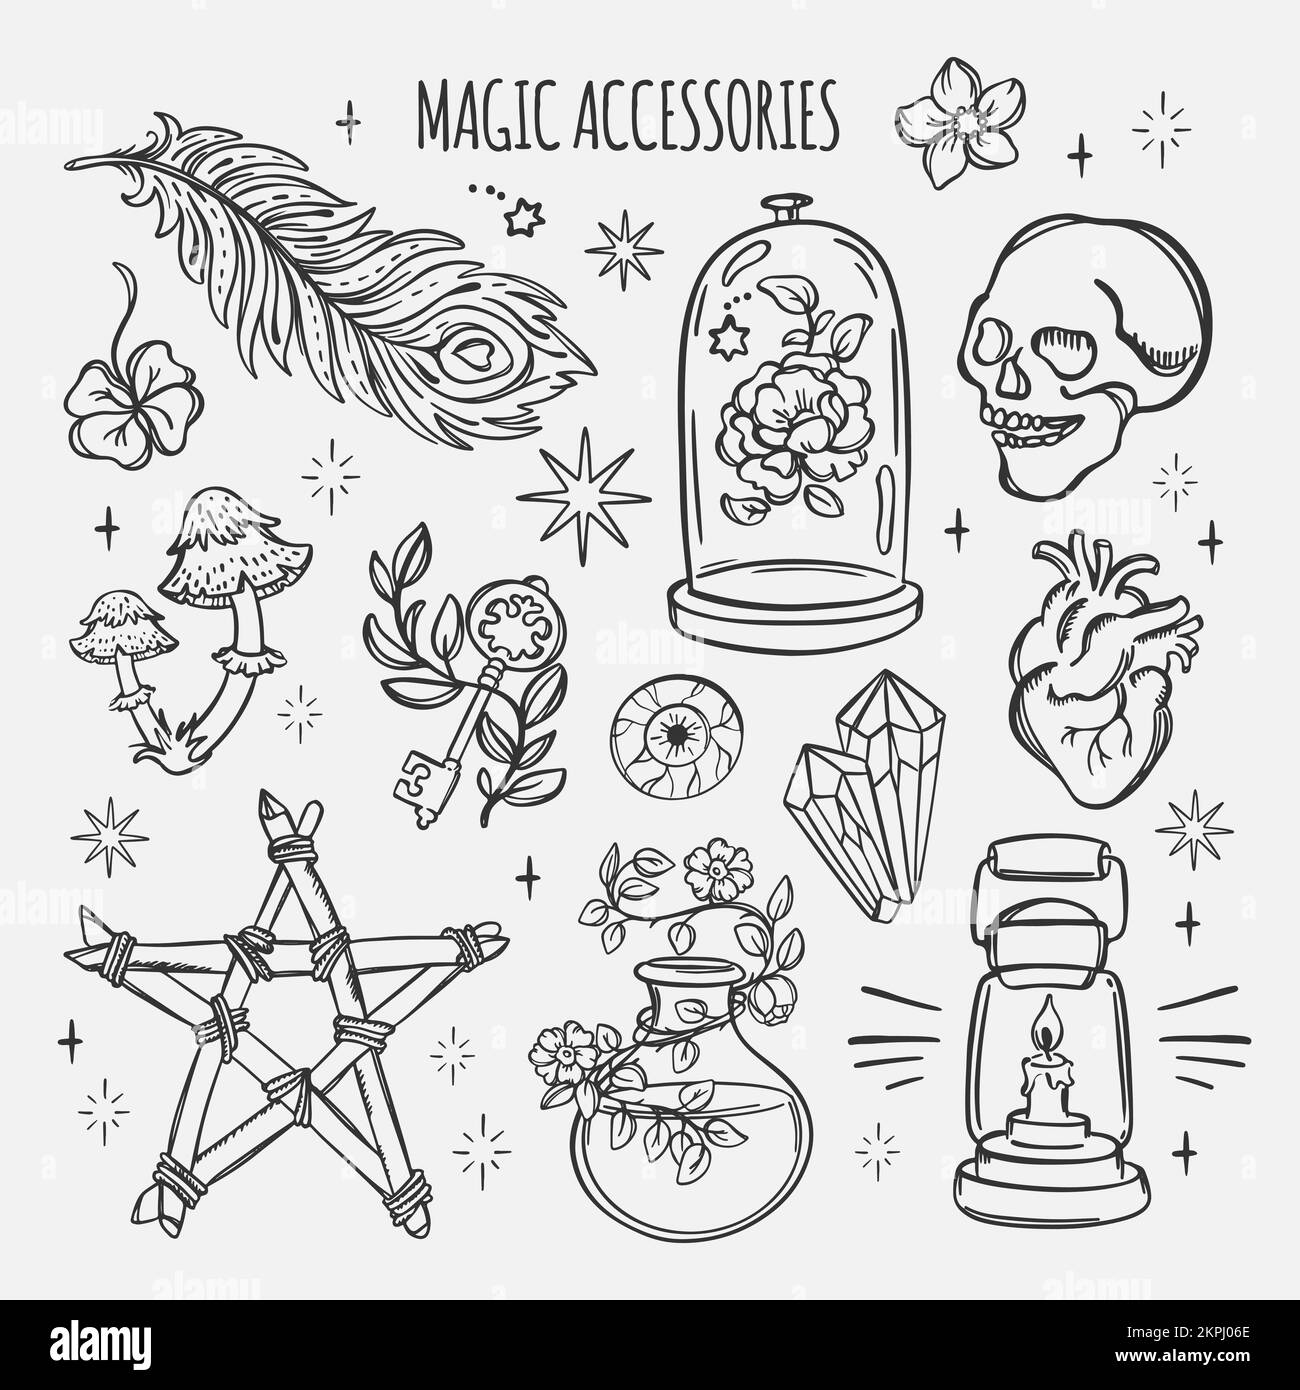 WITCHCRAFT SIGNS Love Magic Alchemic Monochrome Elements Astrology Esoteric Occult Doodle Sketch Hand Drawn Mystery Symbols For Demon Designers And Cr Stock Vector